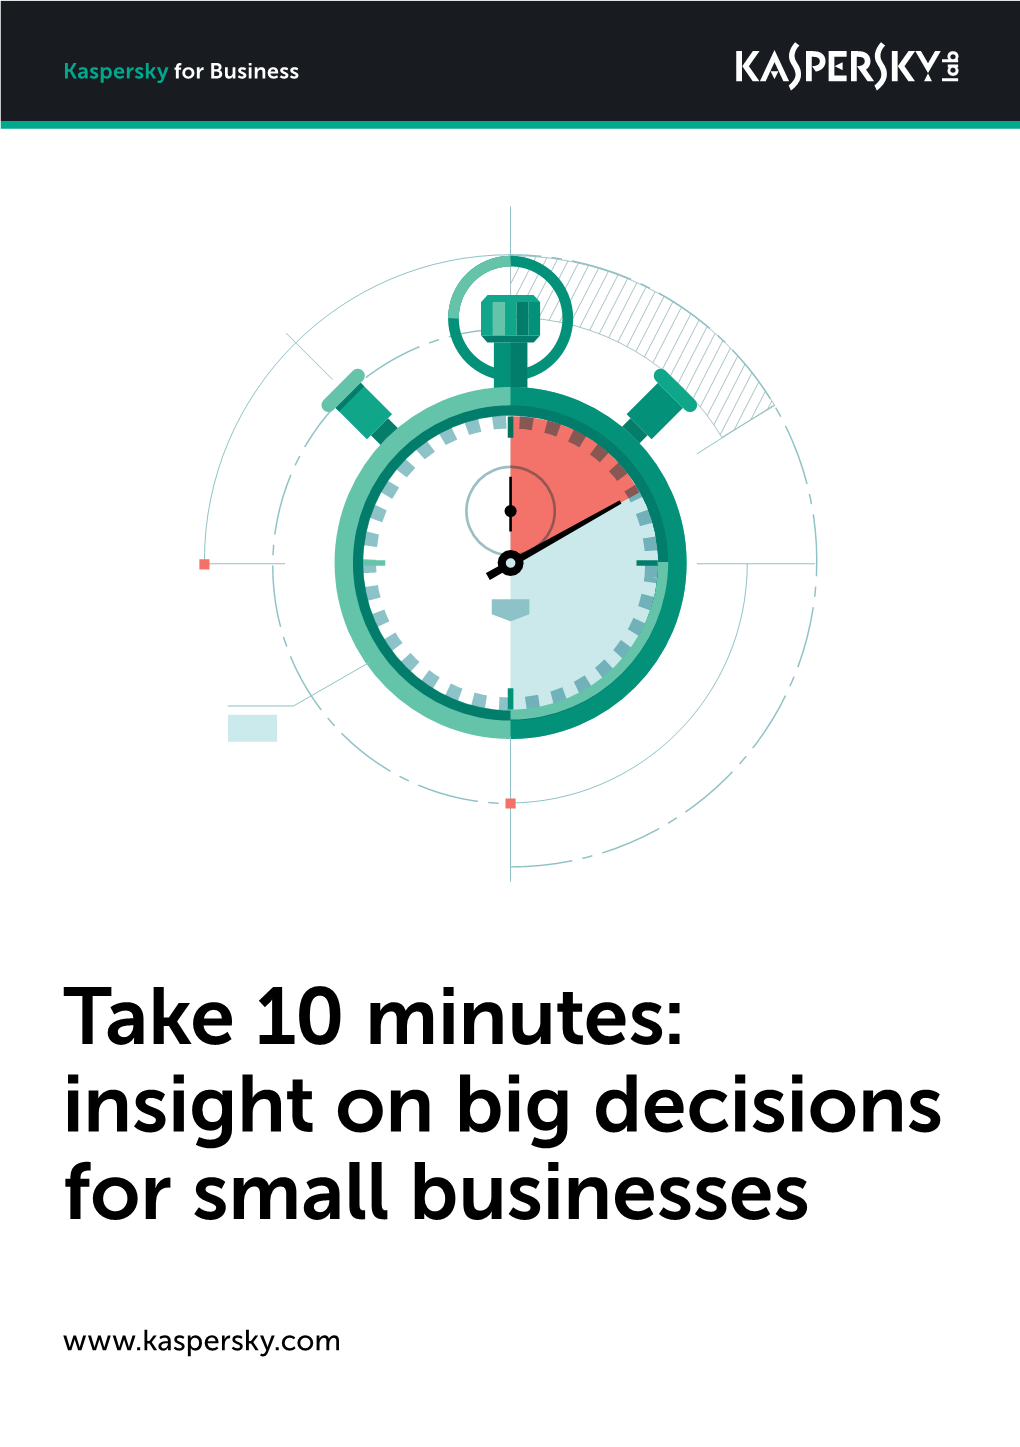 Insight on Big Decisions for Small Businesses